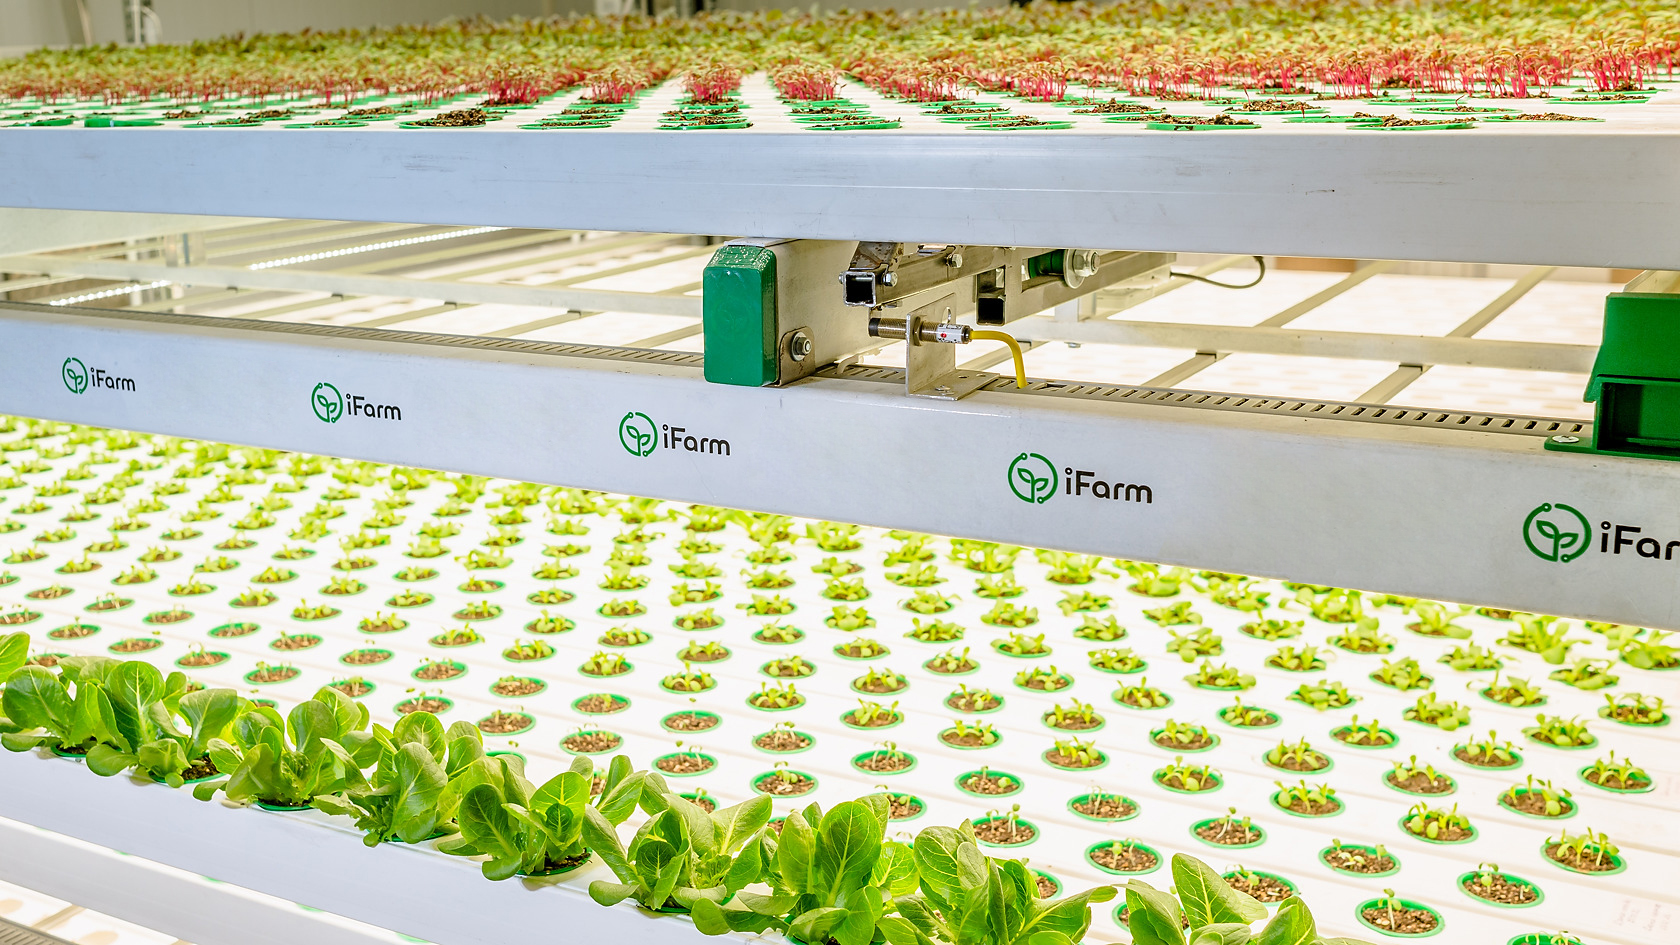 Fully Automated vertical farming technology cuts labour costs and energy bill